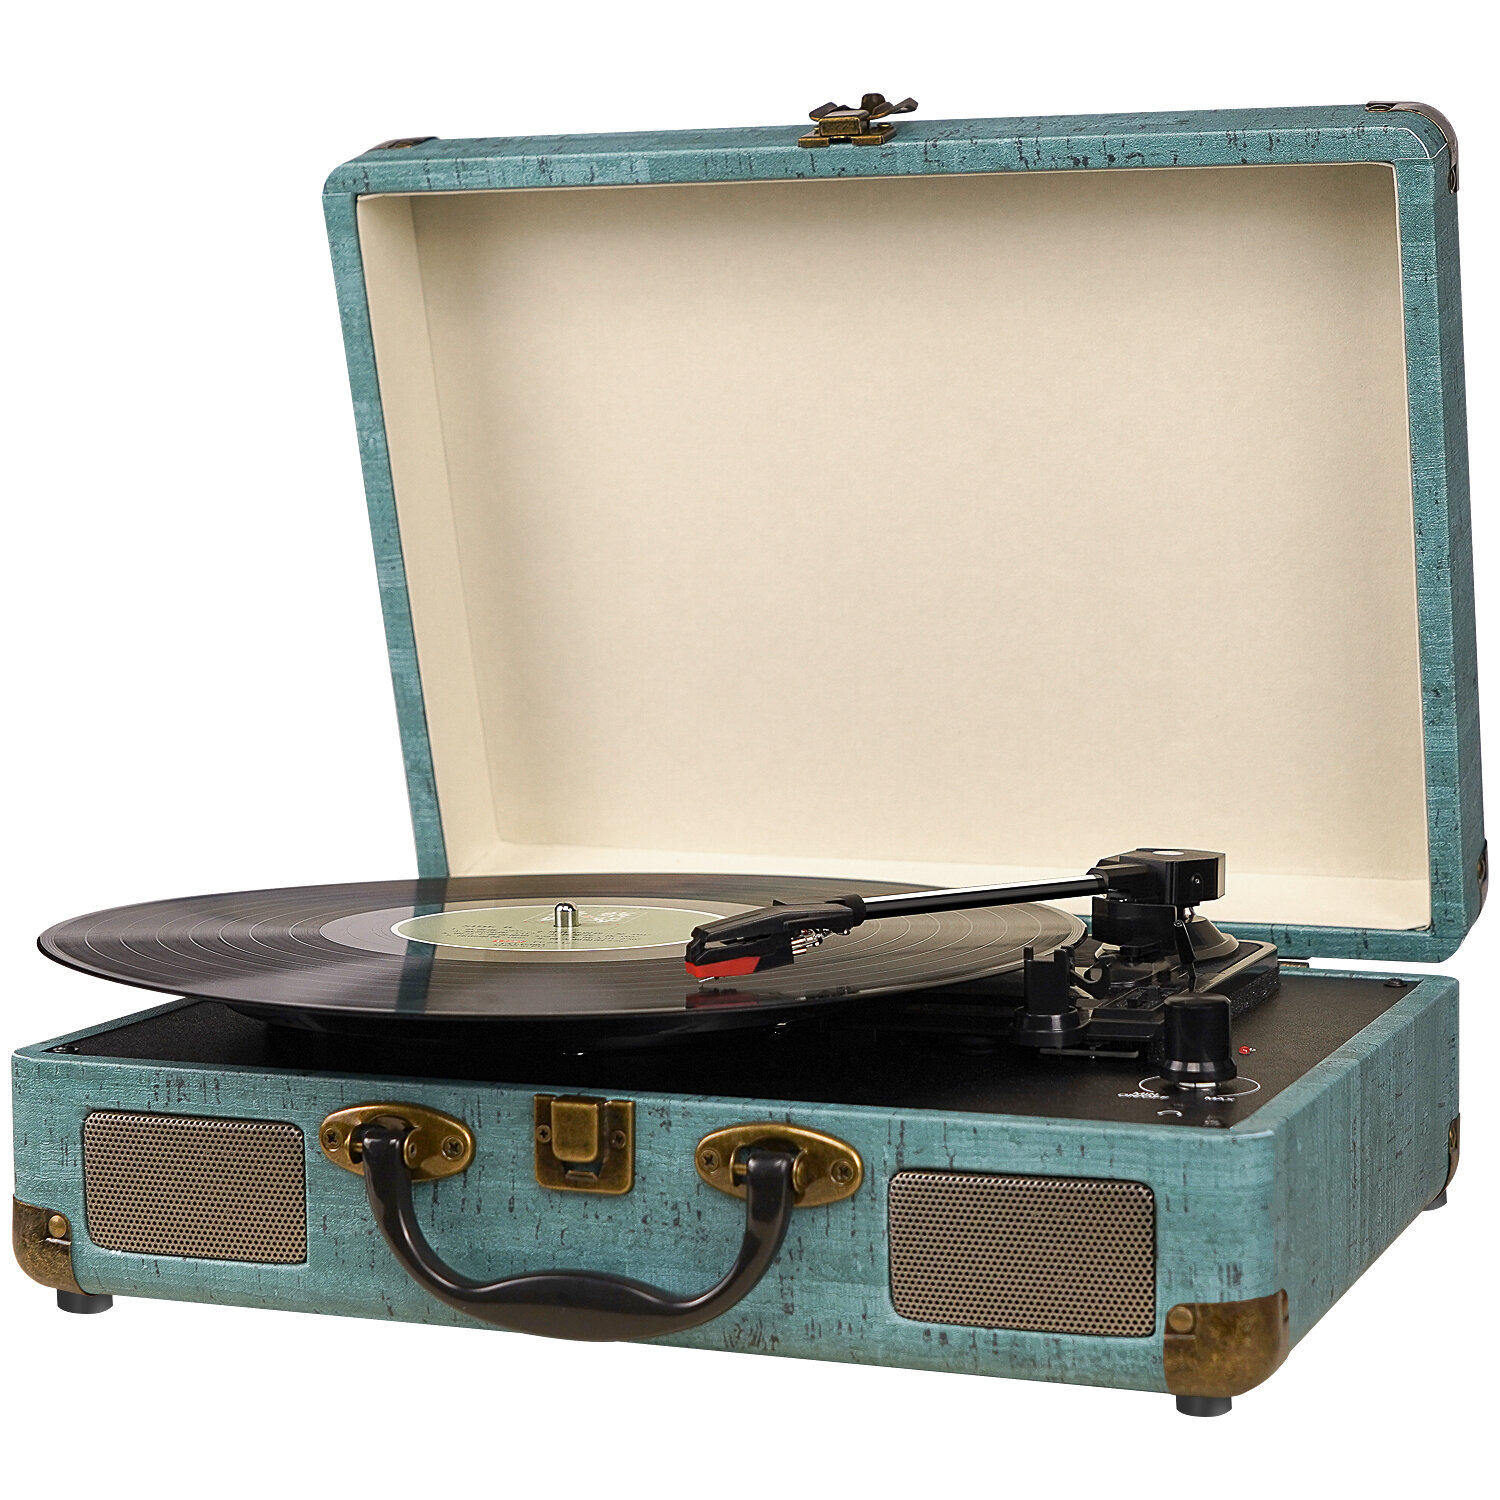 DIGITNOW Portable 3 - Speed Turntable Decorative Record Player with  Bluetooth & Reviews